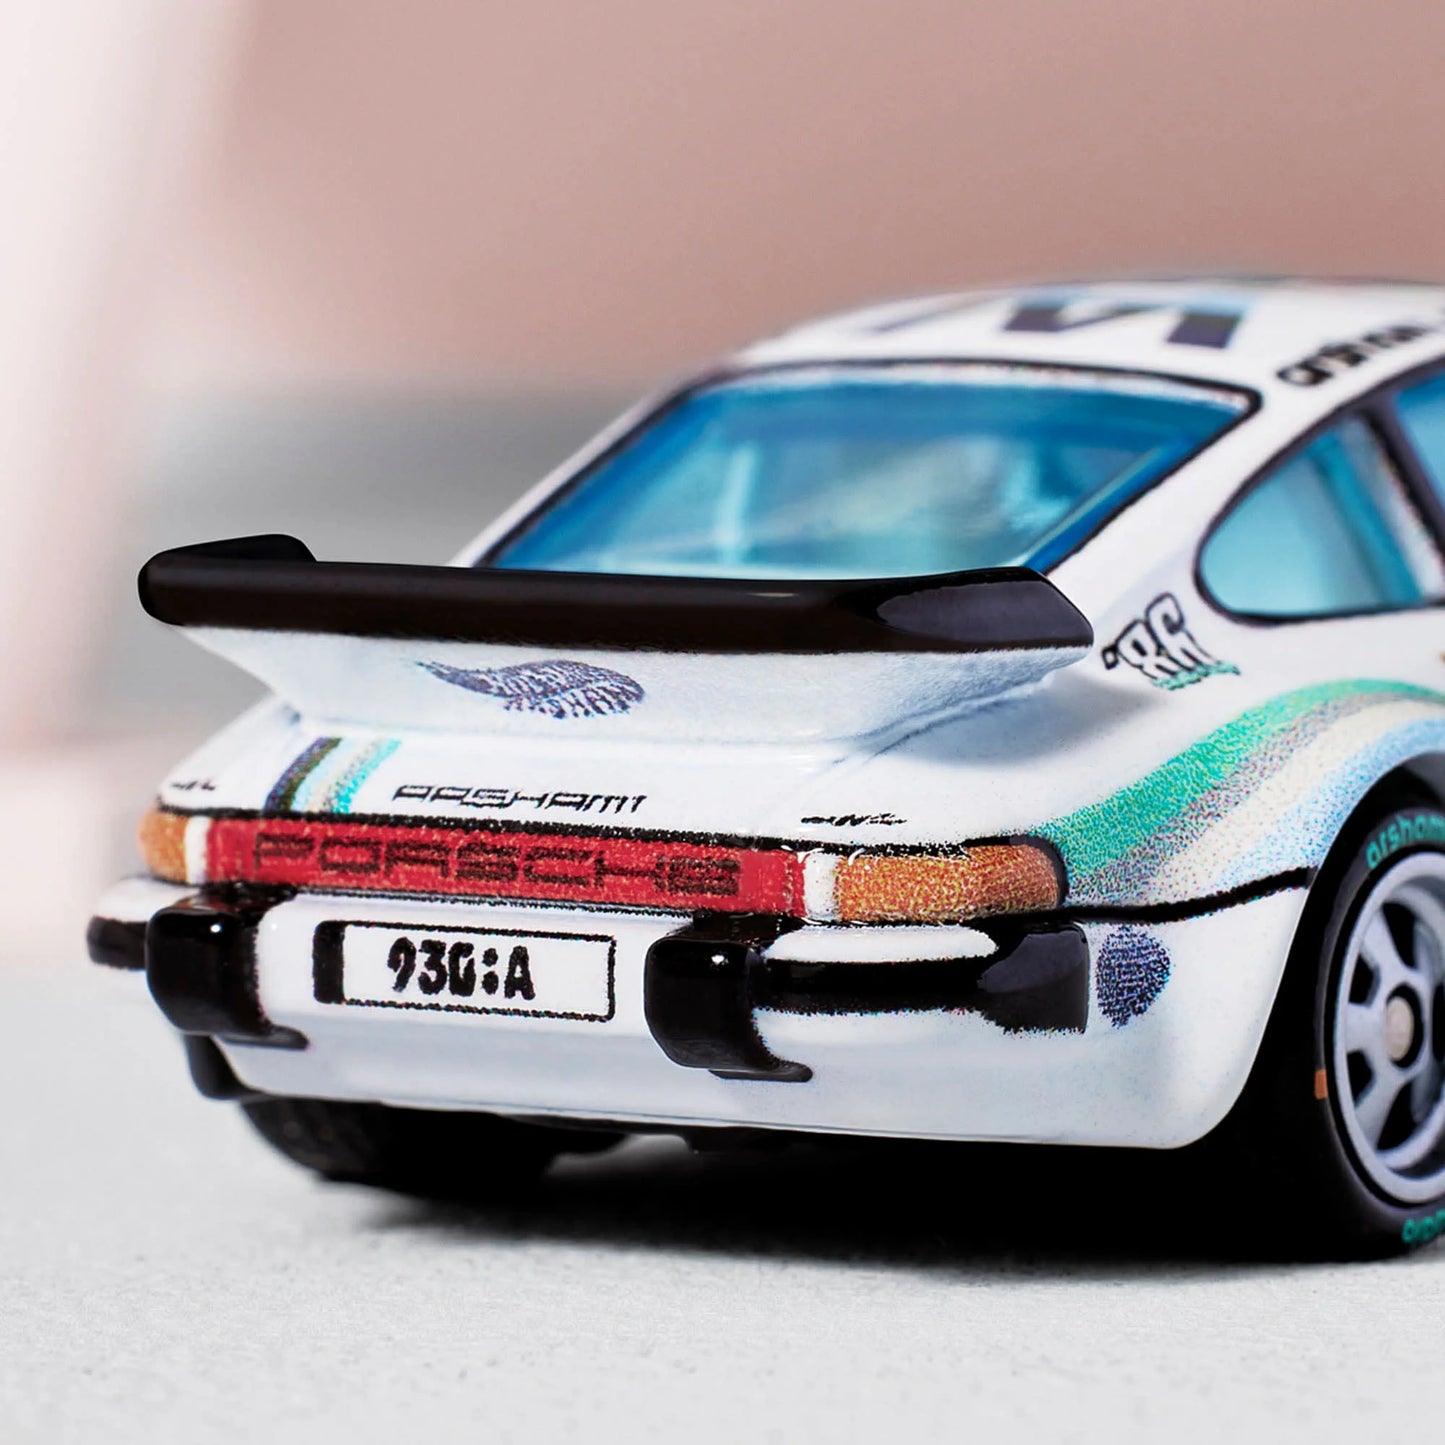 Daniel Arsham x Hot Wheels Livery Porsche 930A, 2024 Body Color: Gloss white Body Type: ZAMAC Chassis: ZAMAC Wheels: Real Riders classic 5-spoke wheels with liquid silver hubs and “arsham studio” tampo Window Color: Lightly tinted Interior Color: Plastic replica of 1:1 version’s Italian leather and stonewashed canvas Scale 1:64 Includes sealing label and Certificate of Authenticity Packaged in a collector display case with simulated concrete base.